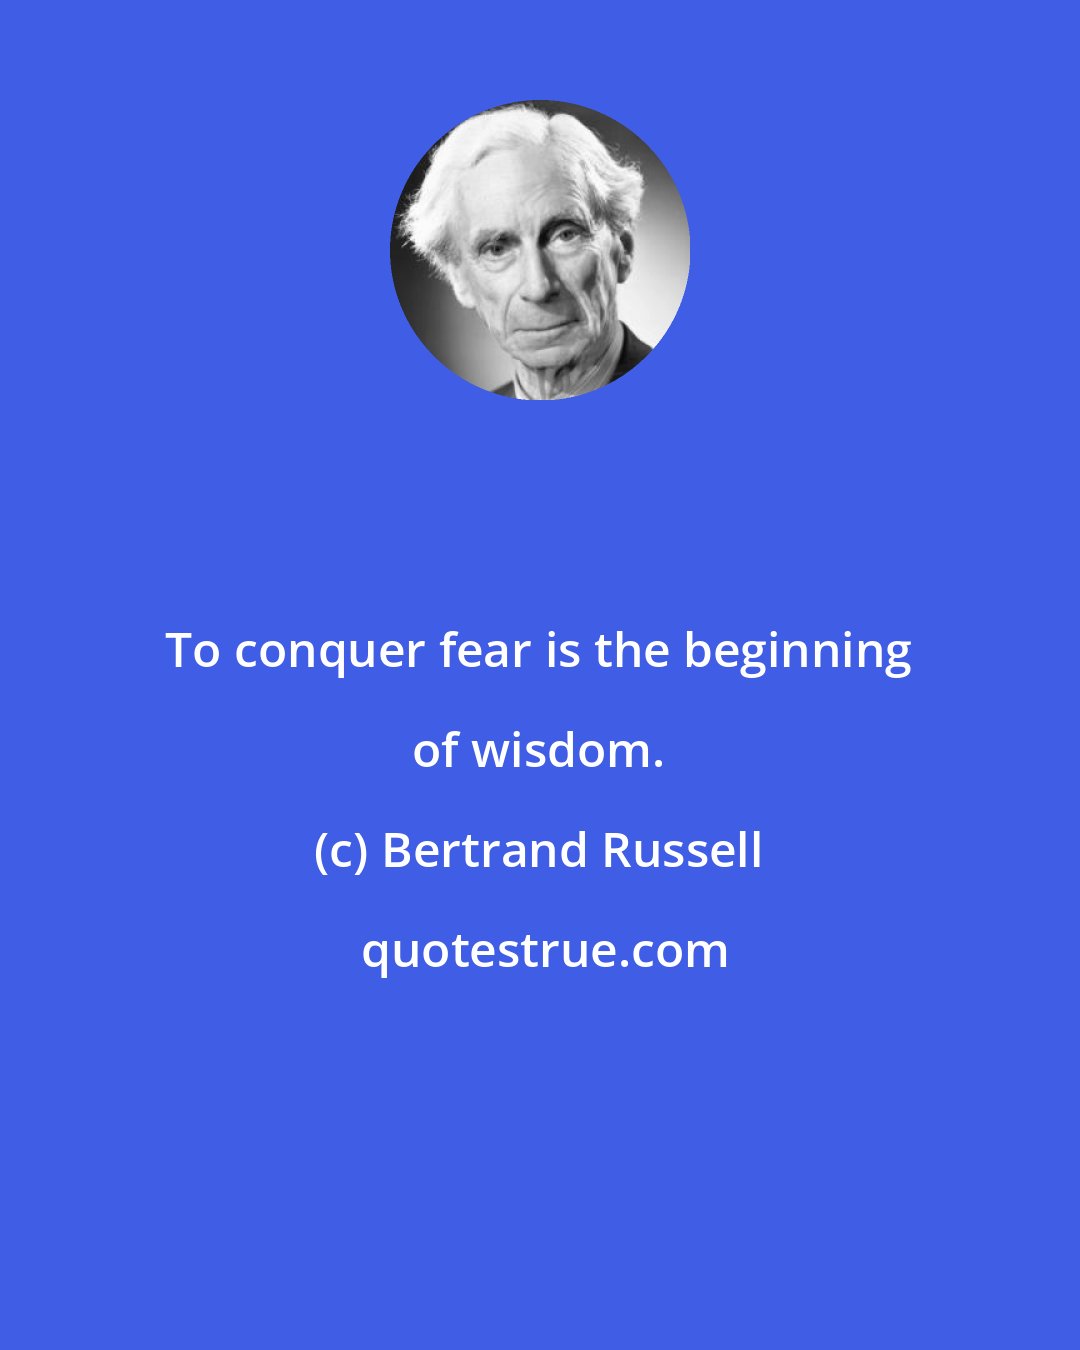 Bertrand Russell: To conquer fear is the beginning of wisdom.